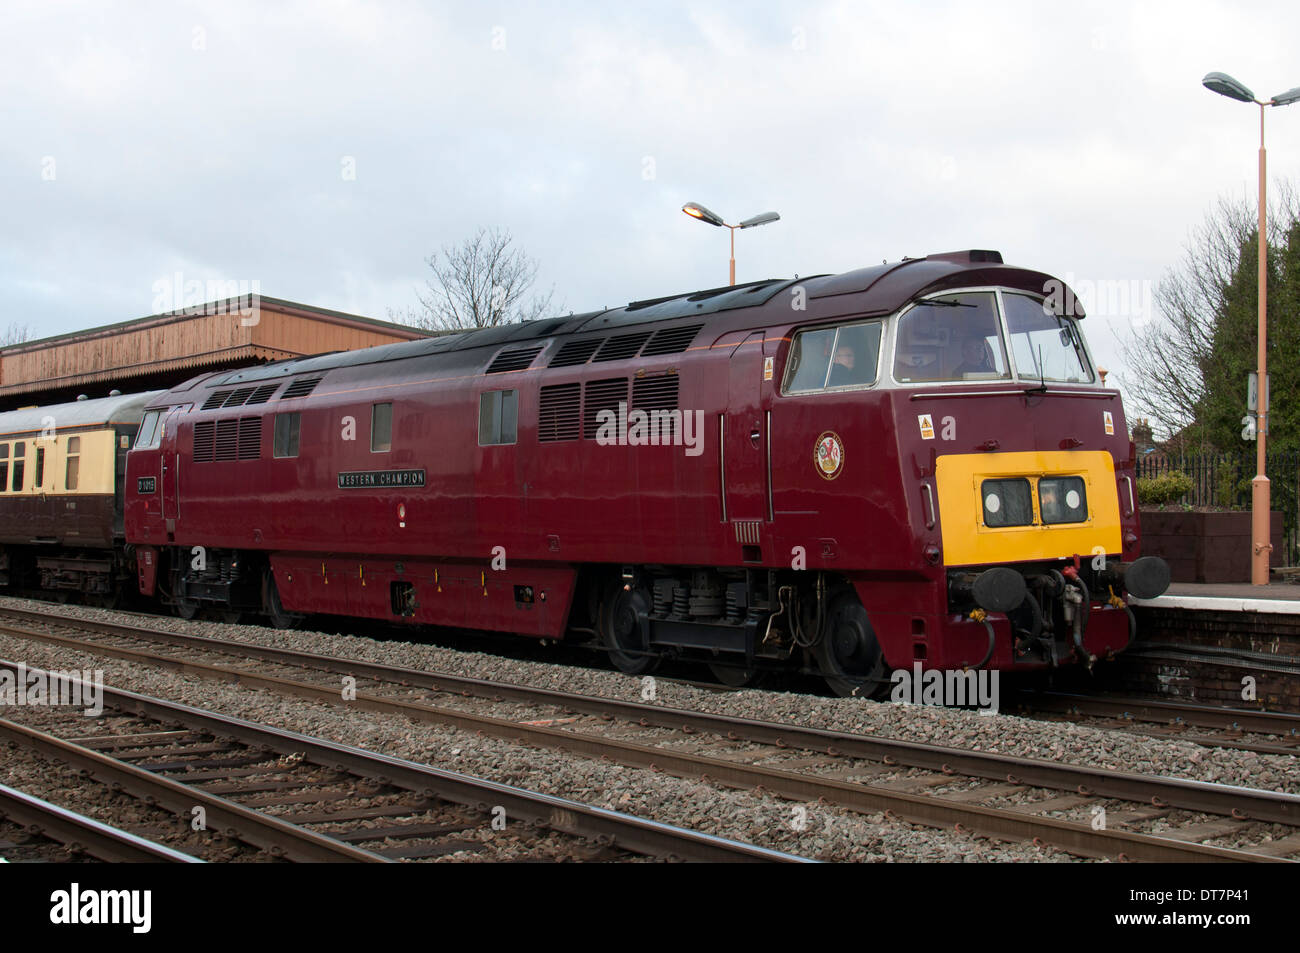 Preserved class 52 diesel locomotive No D1015 "Western Champion" at Leamington Spa, UK Stock Photo